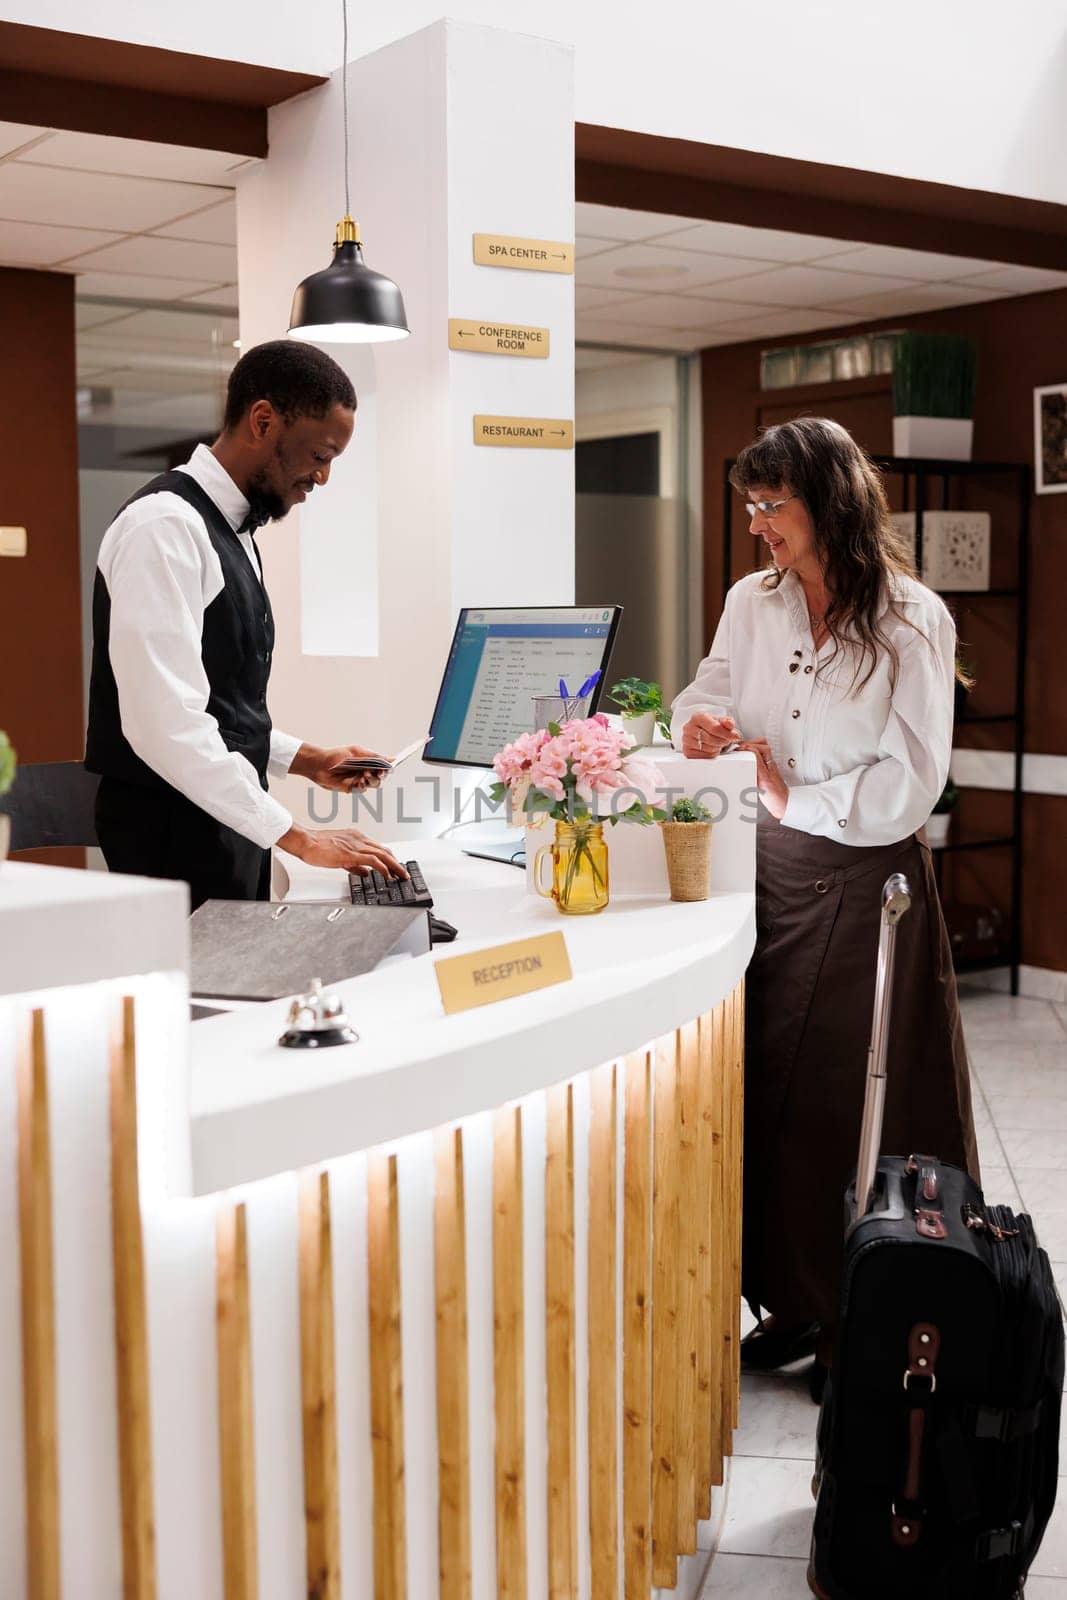 Hotel check-in with concierge assistance by DCStudio